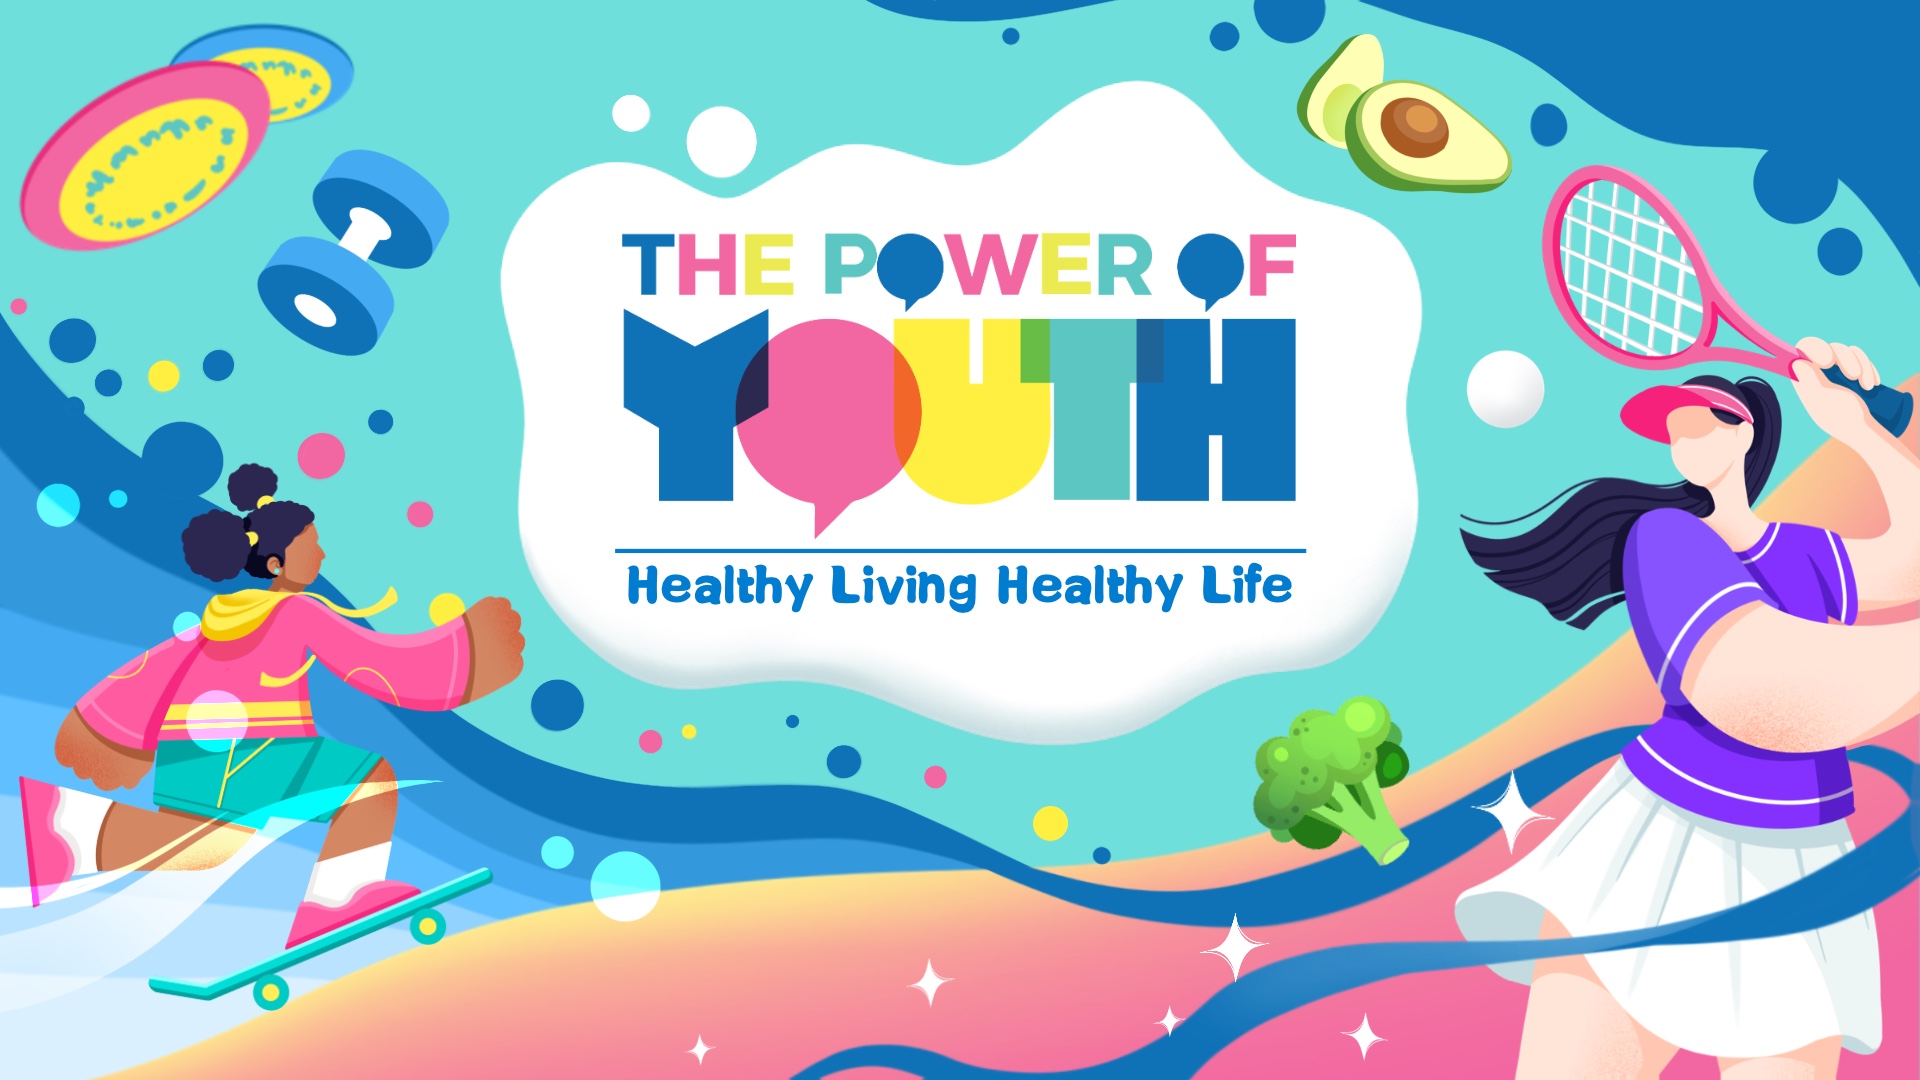 Watch: 'The Power of Youth' – Healthy Living